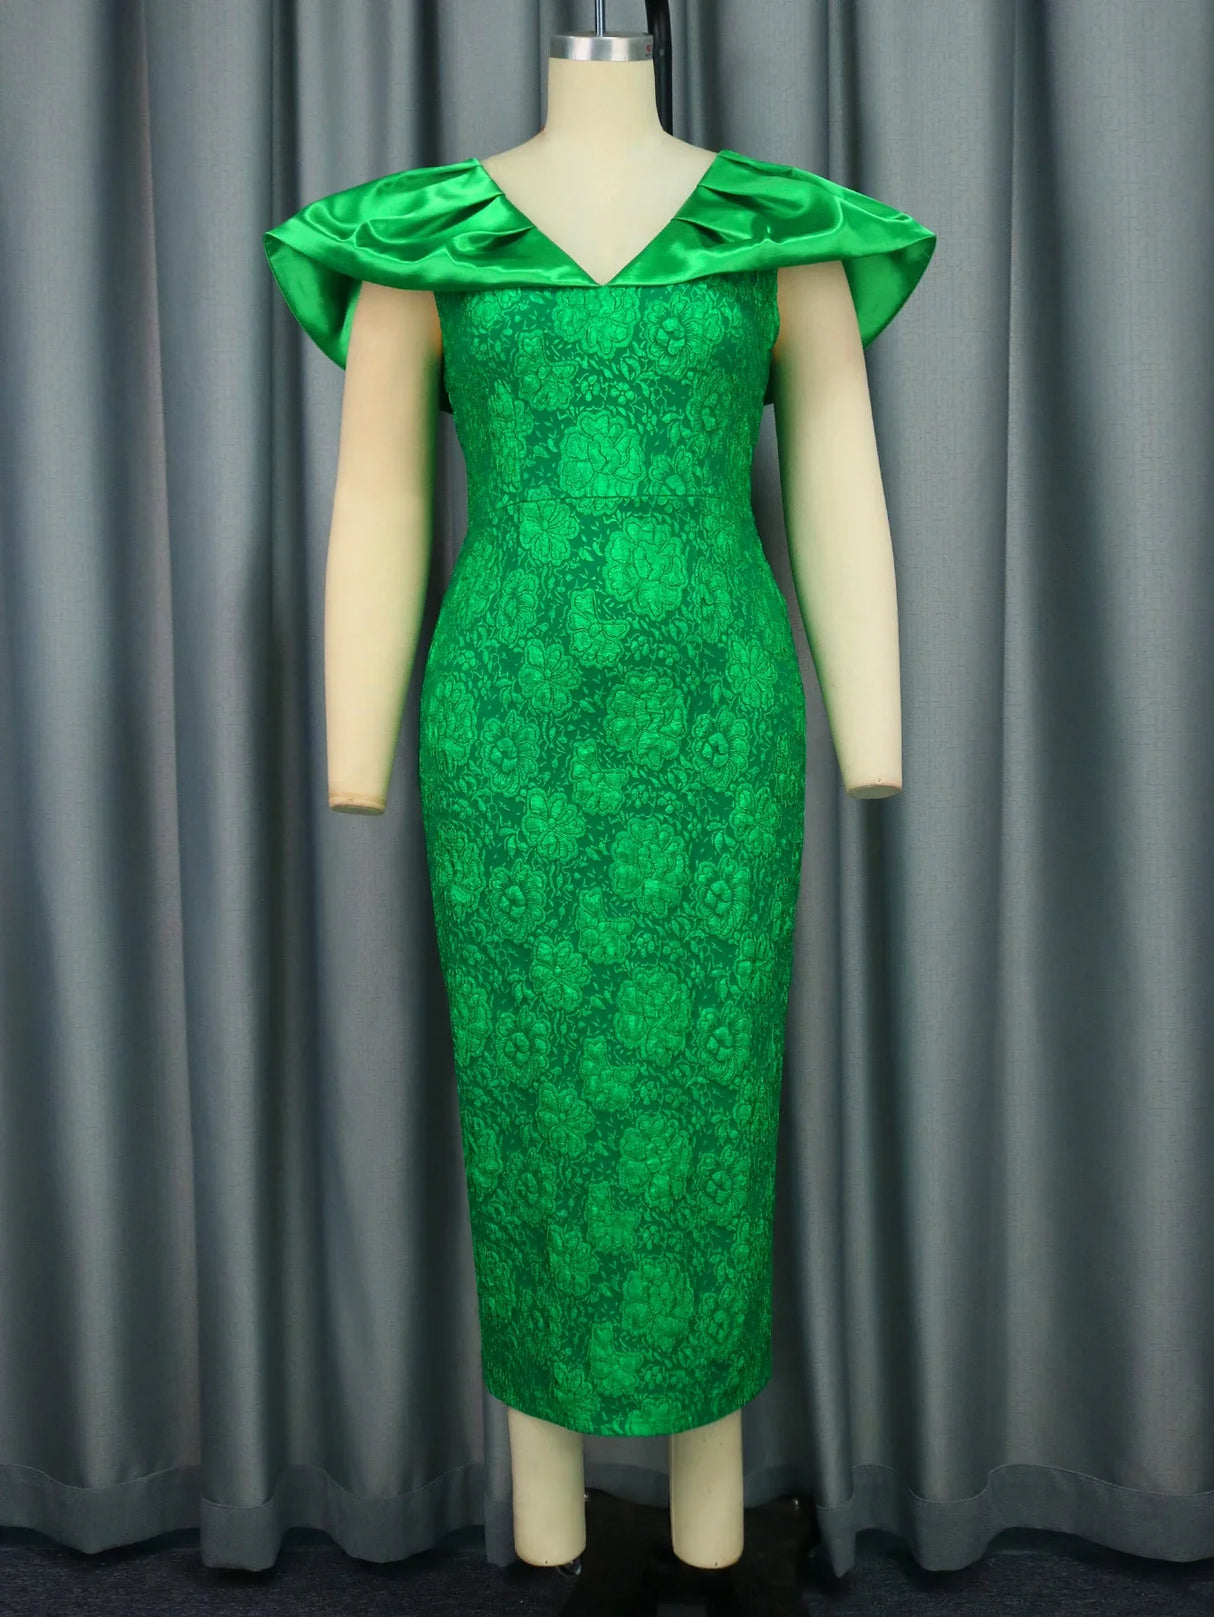 Green Jacquard Bodycon Dress V Neck Patchwork Sleeves Party Elegant Dinner Dance Event Occasion Classy Gowns Female African New